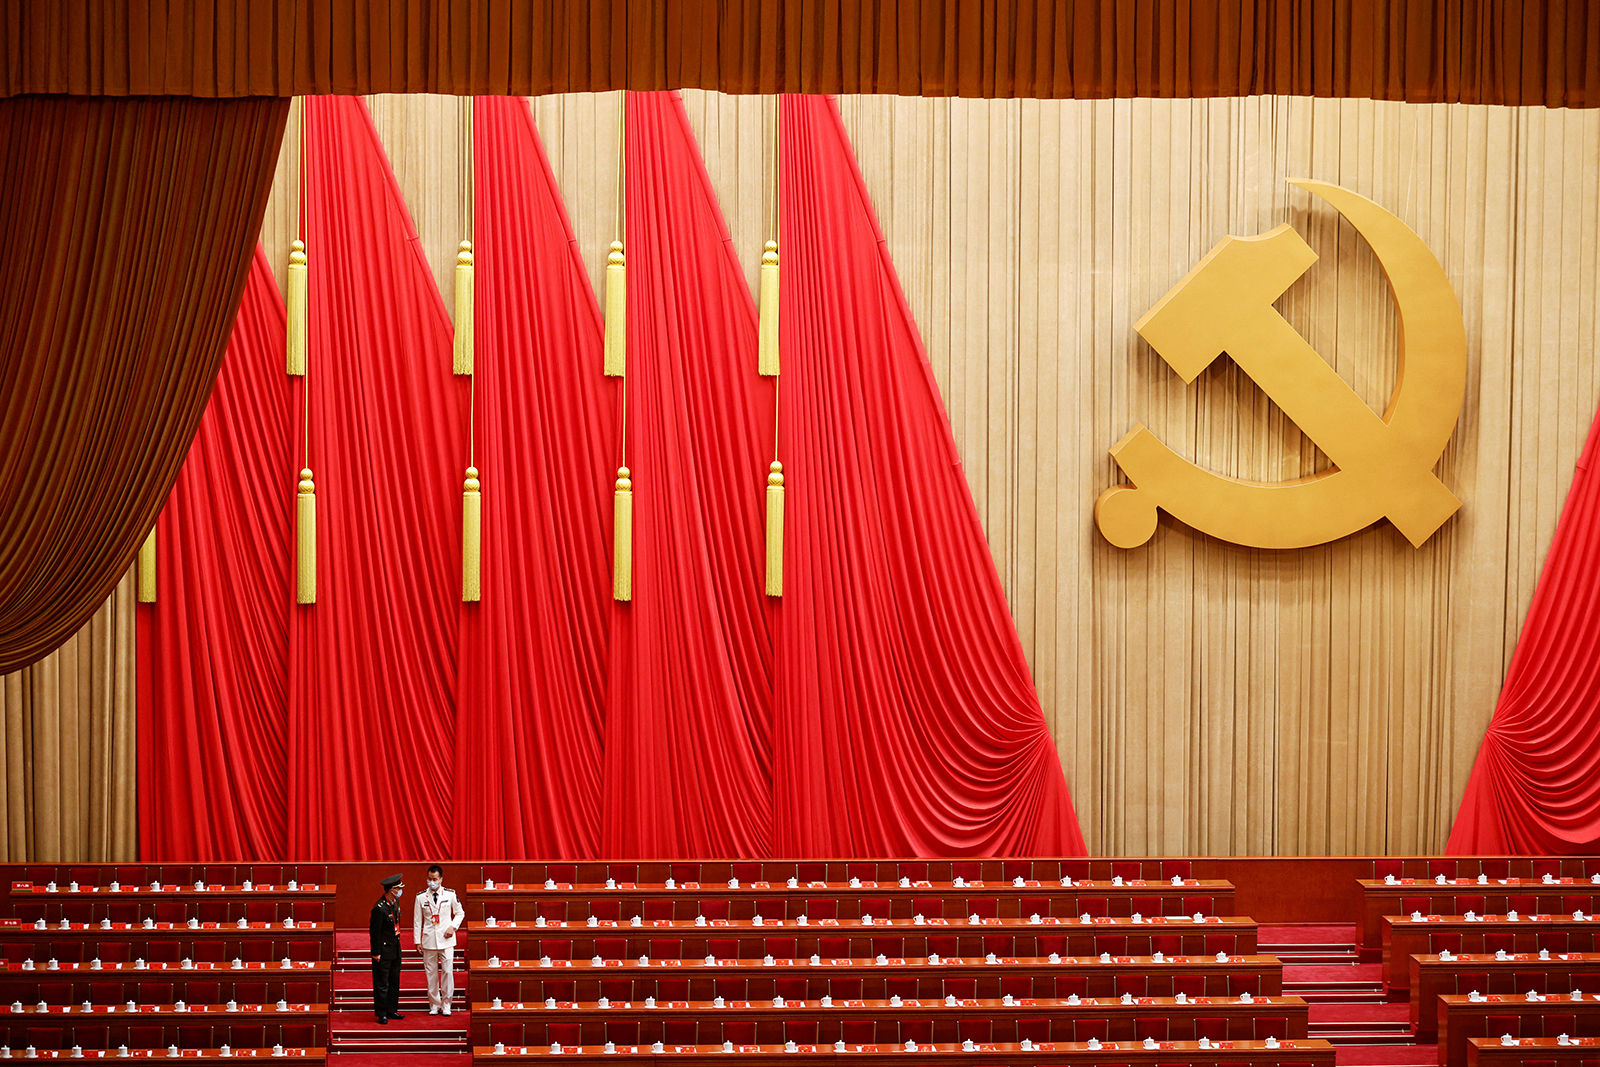 Military delegates arrive before the opening ceremony of the 20th National Congress of the Communist Party of China, at the Great Hall of the People in Beijing on October 16.